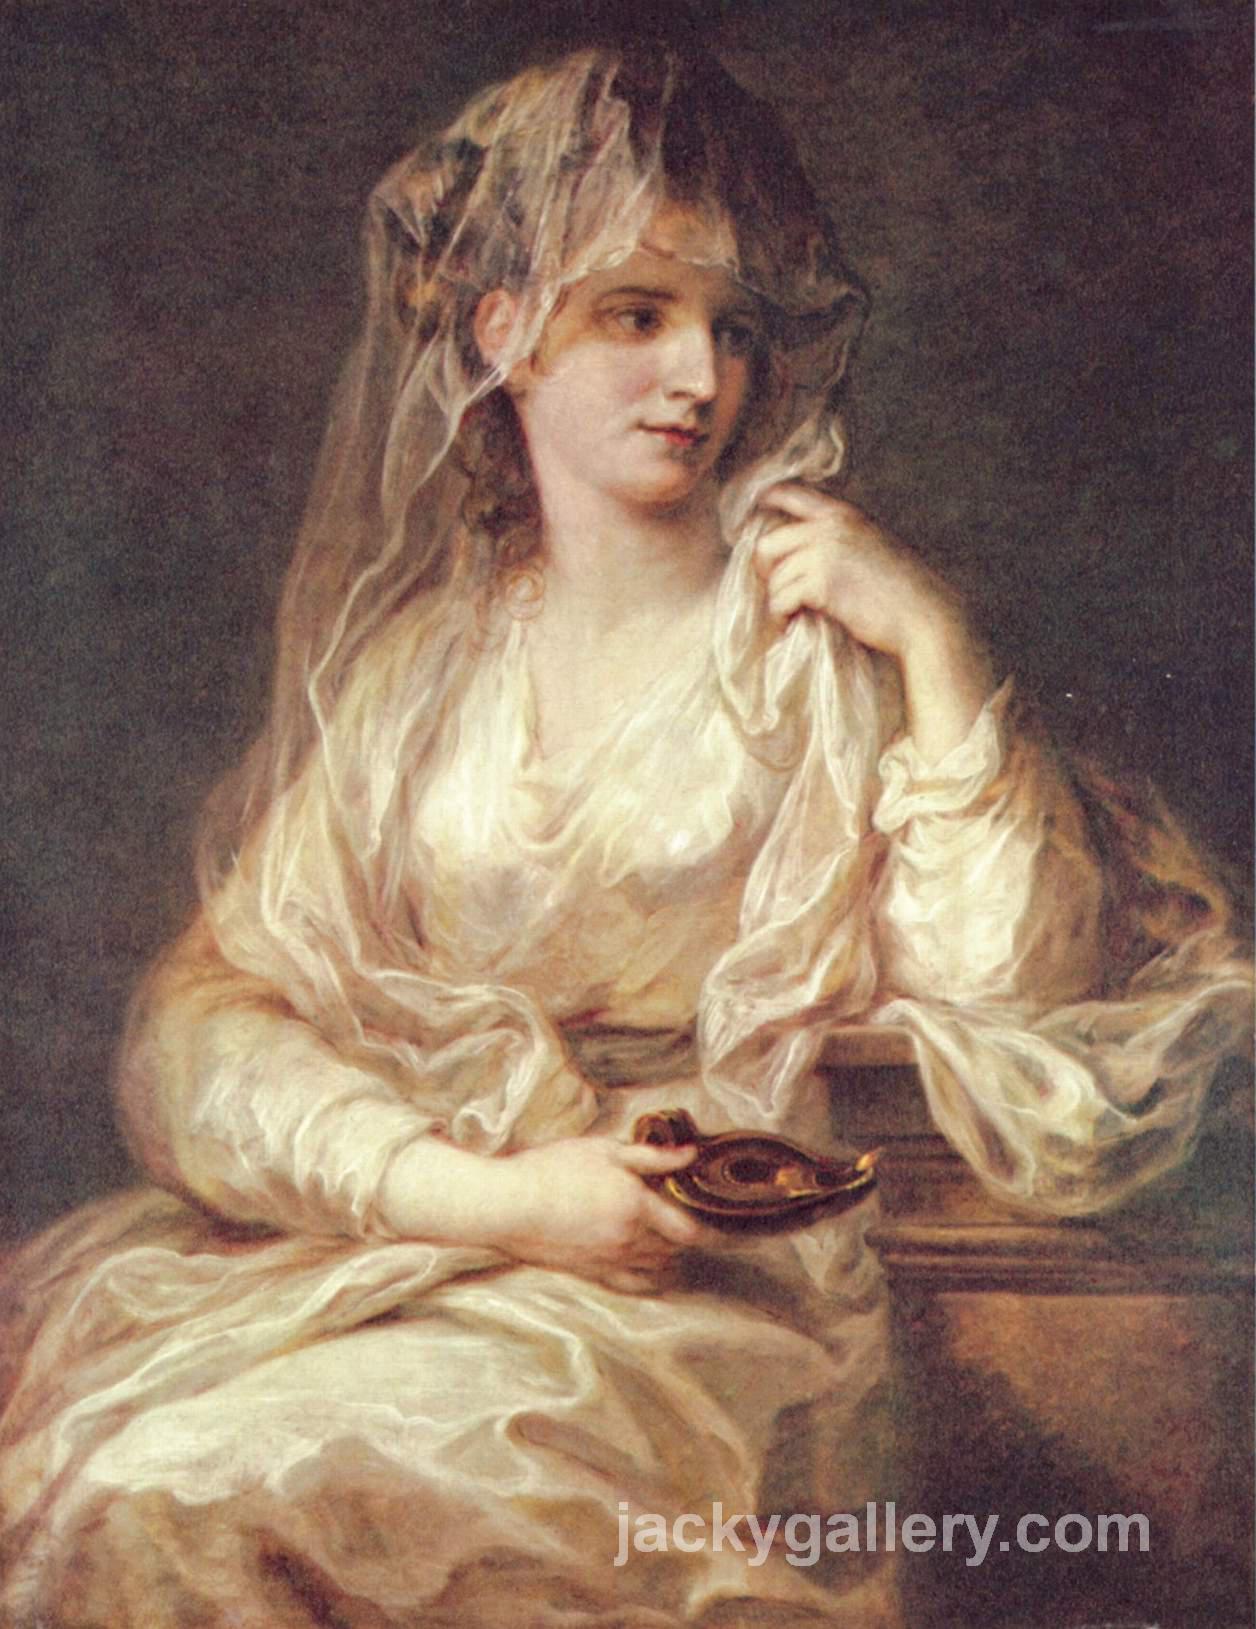 Portrait of a Woman as a Vestal Virgin, Angelica Kauffman painting